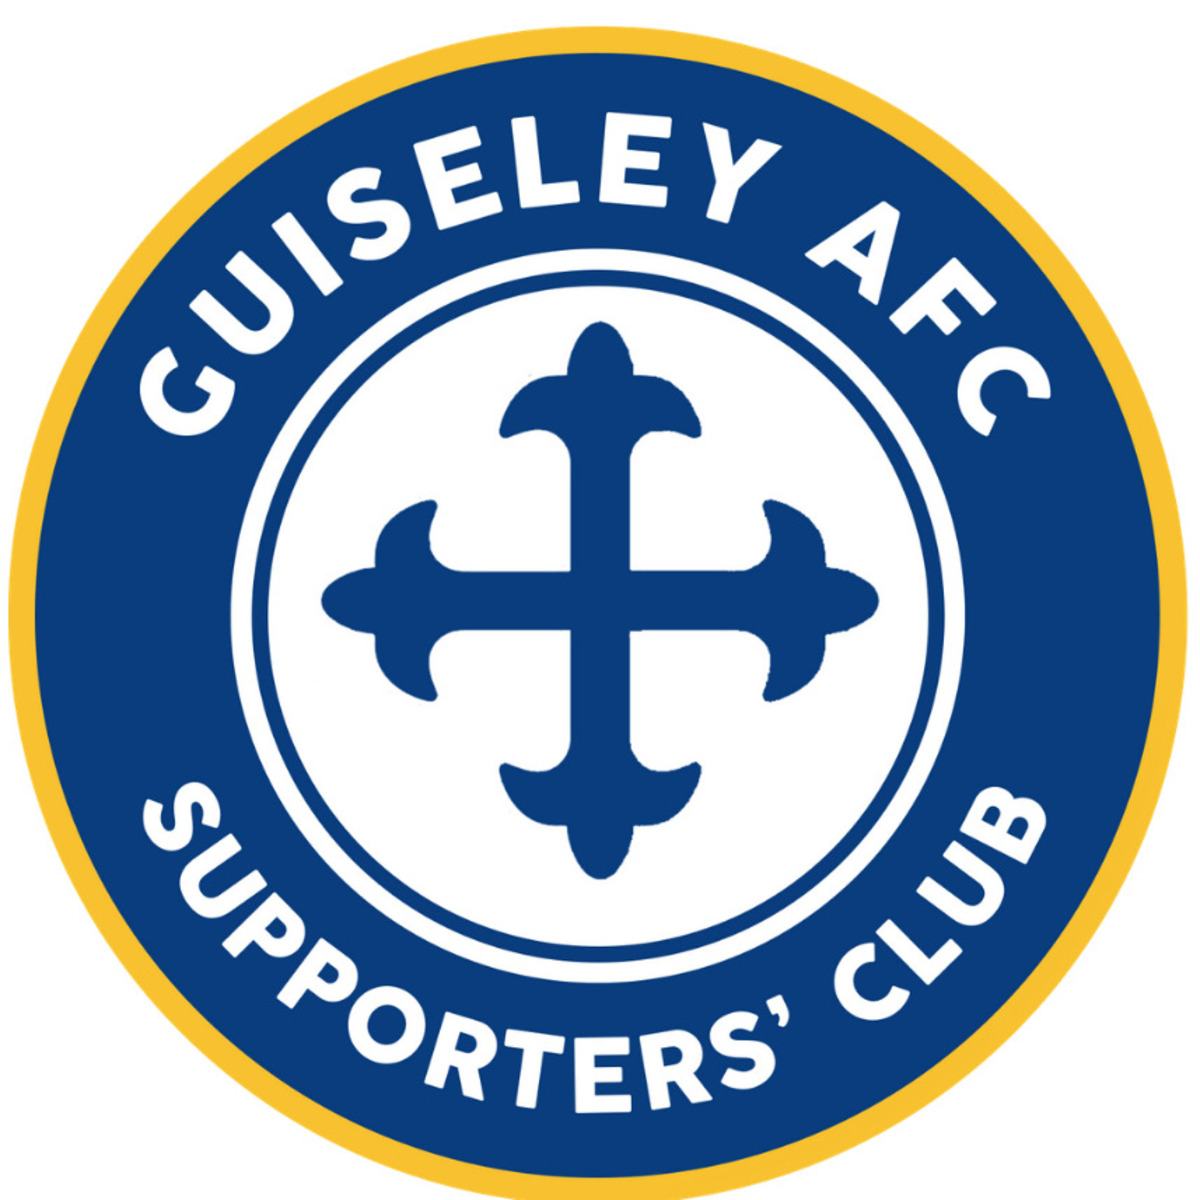 guiseley-afc-22-football-club-facts